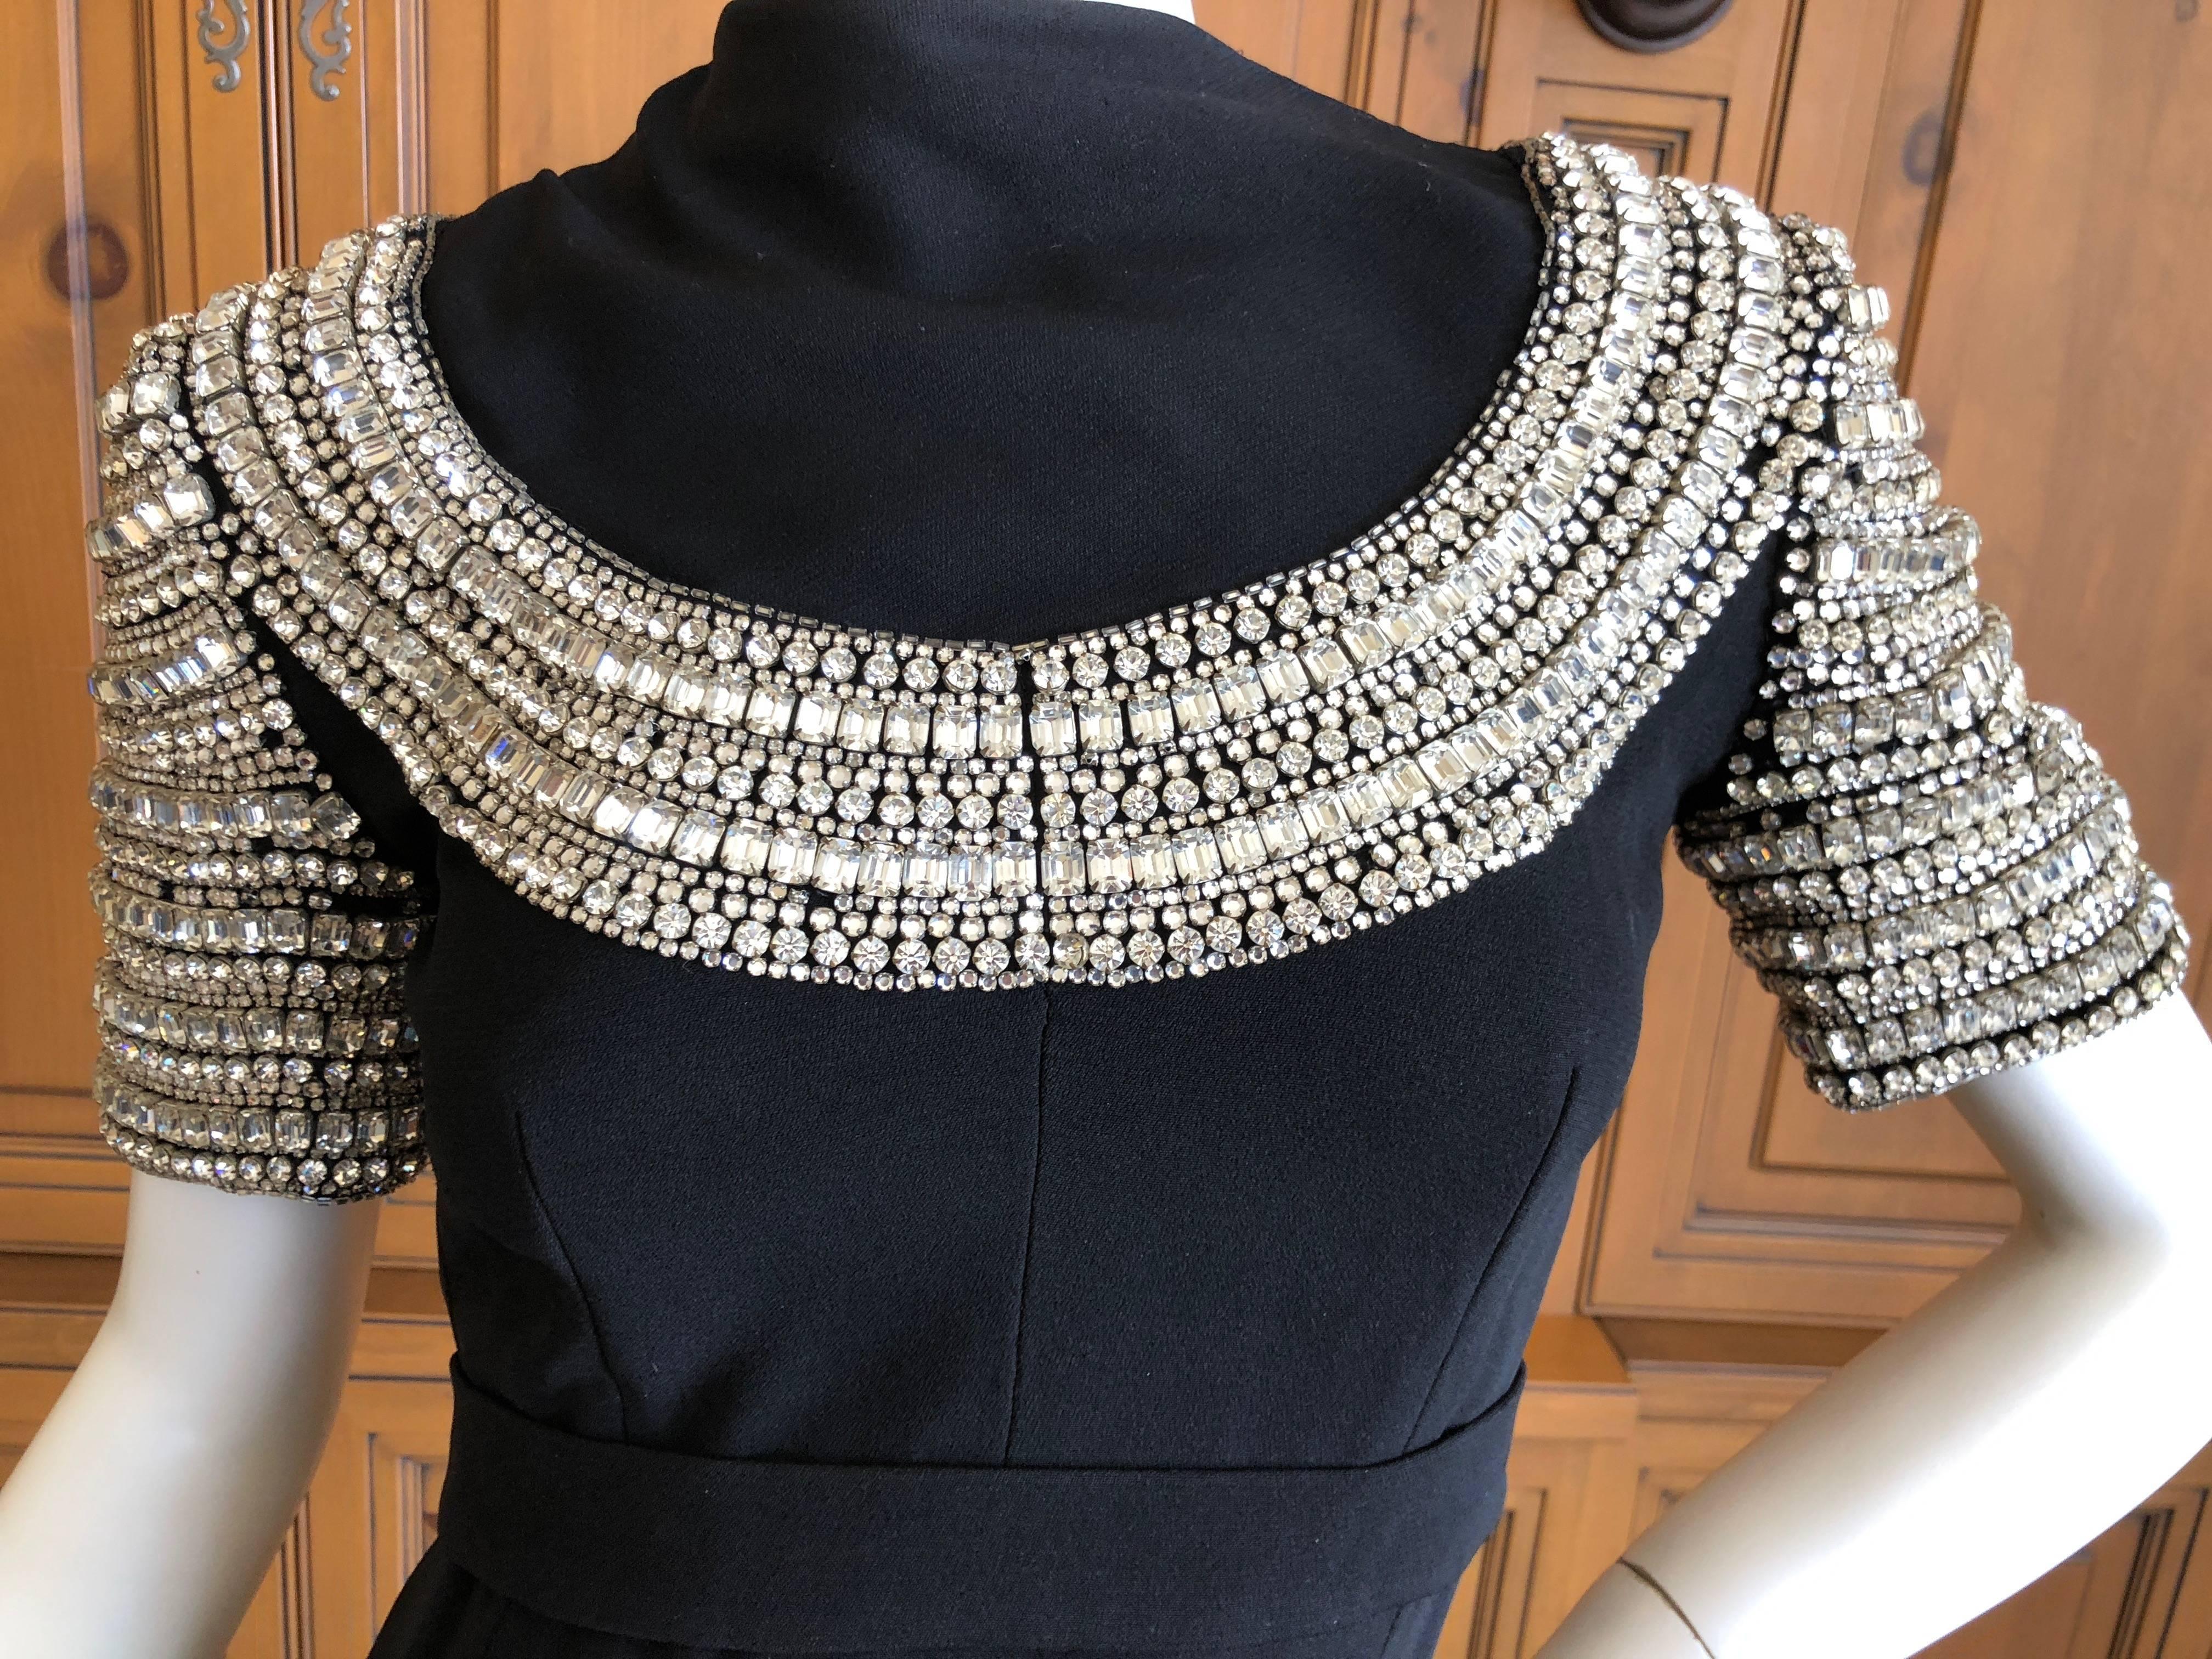 Cardinali Black Evening Dress with Rhinestone Crystal Embellishment, 1970s  In Good Condition For Sale In Cloverdale, CA